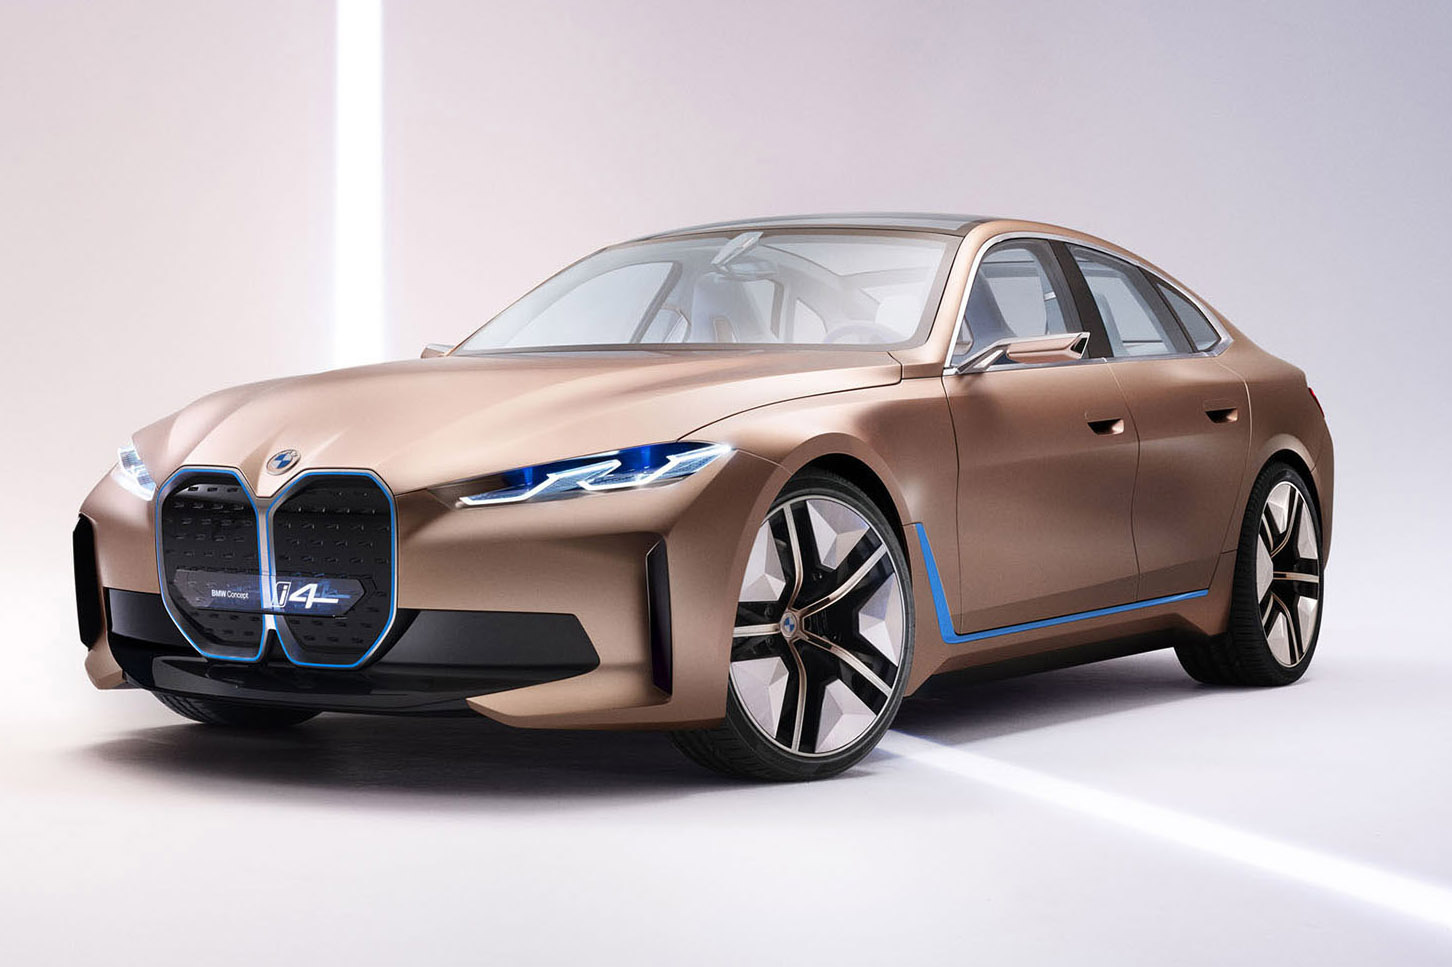 BMW i4 electric saloon shown in nearproduction form Autocar